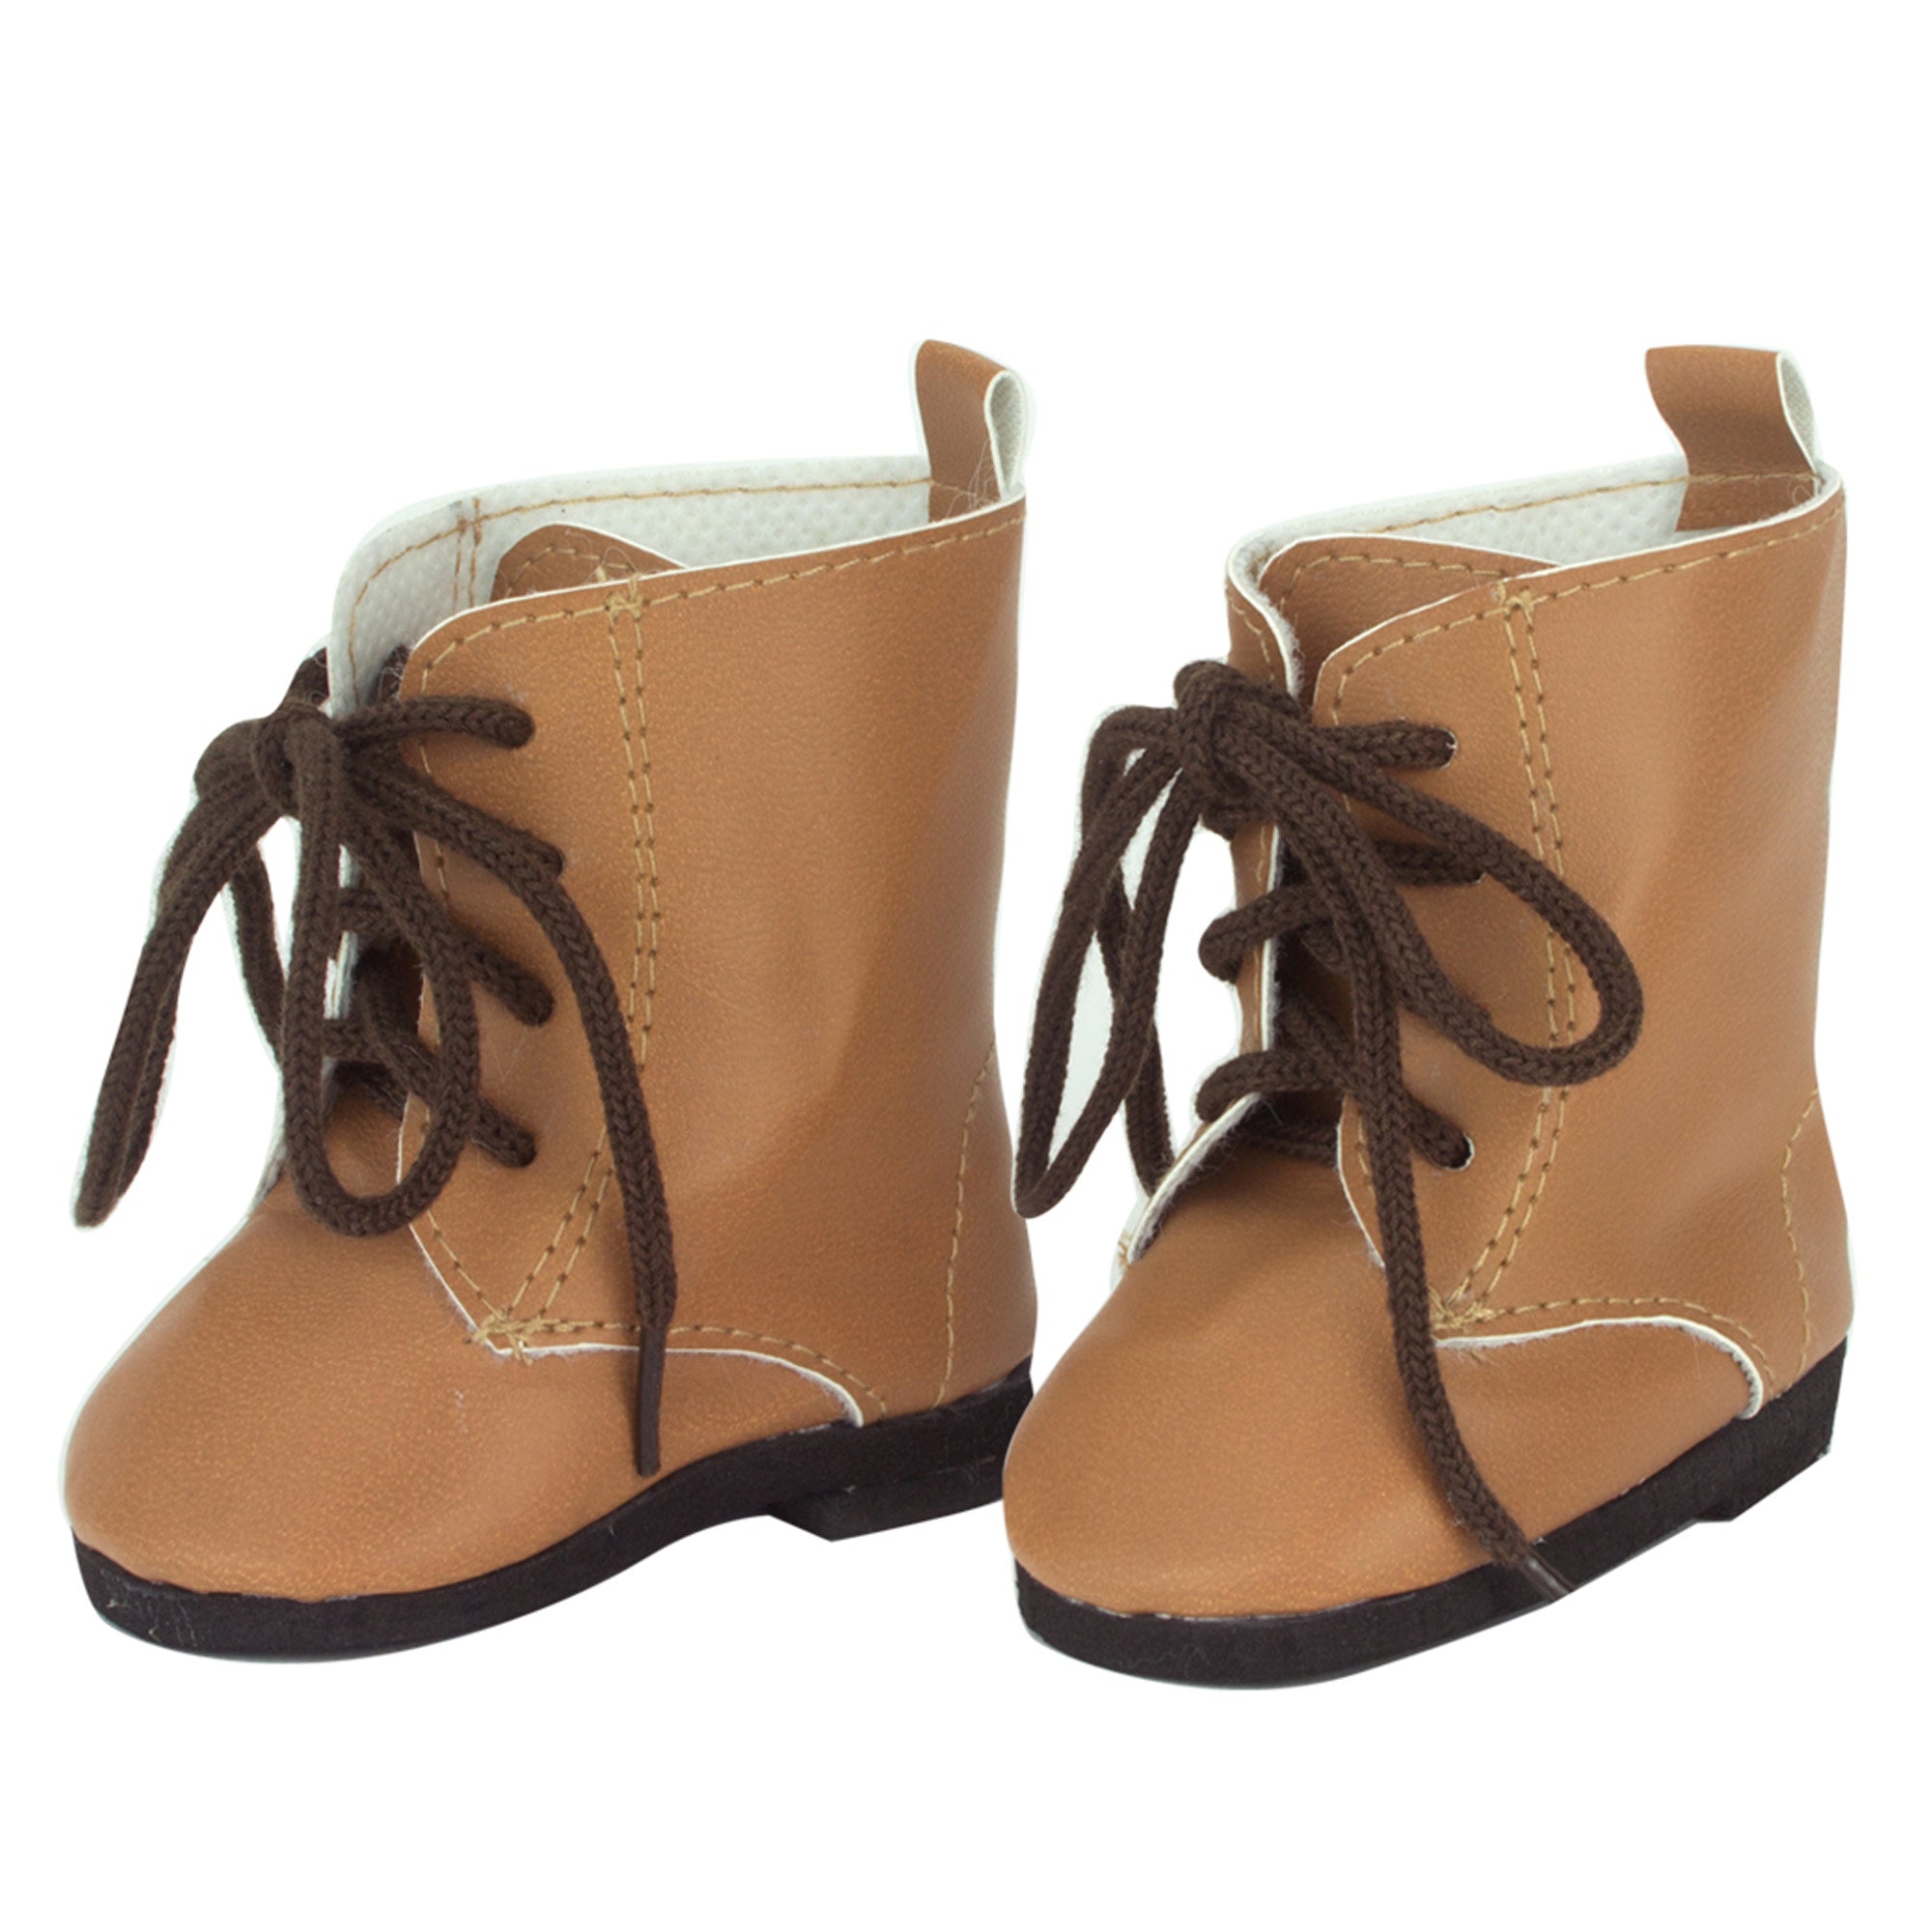 Sophia’s Gender-Neutral Mix & Match Solid-Colored Faux Leather Lace-Up Slip-On Boots for 18” Dolls, Brown